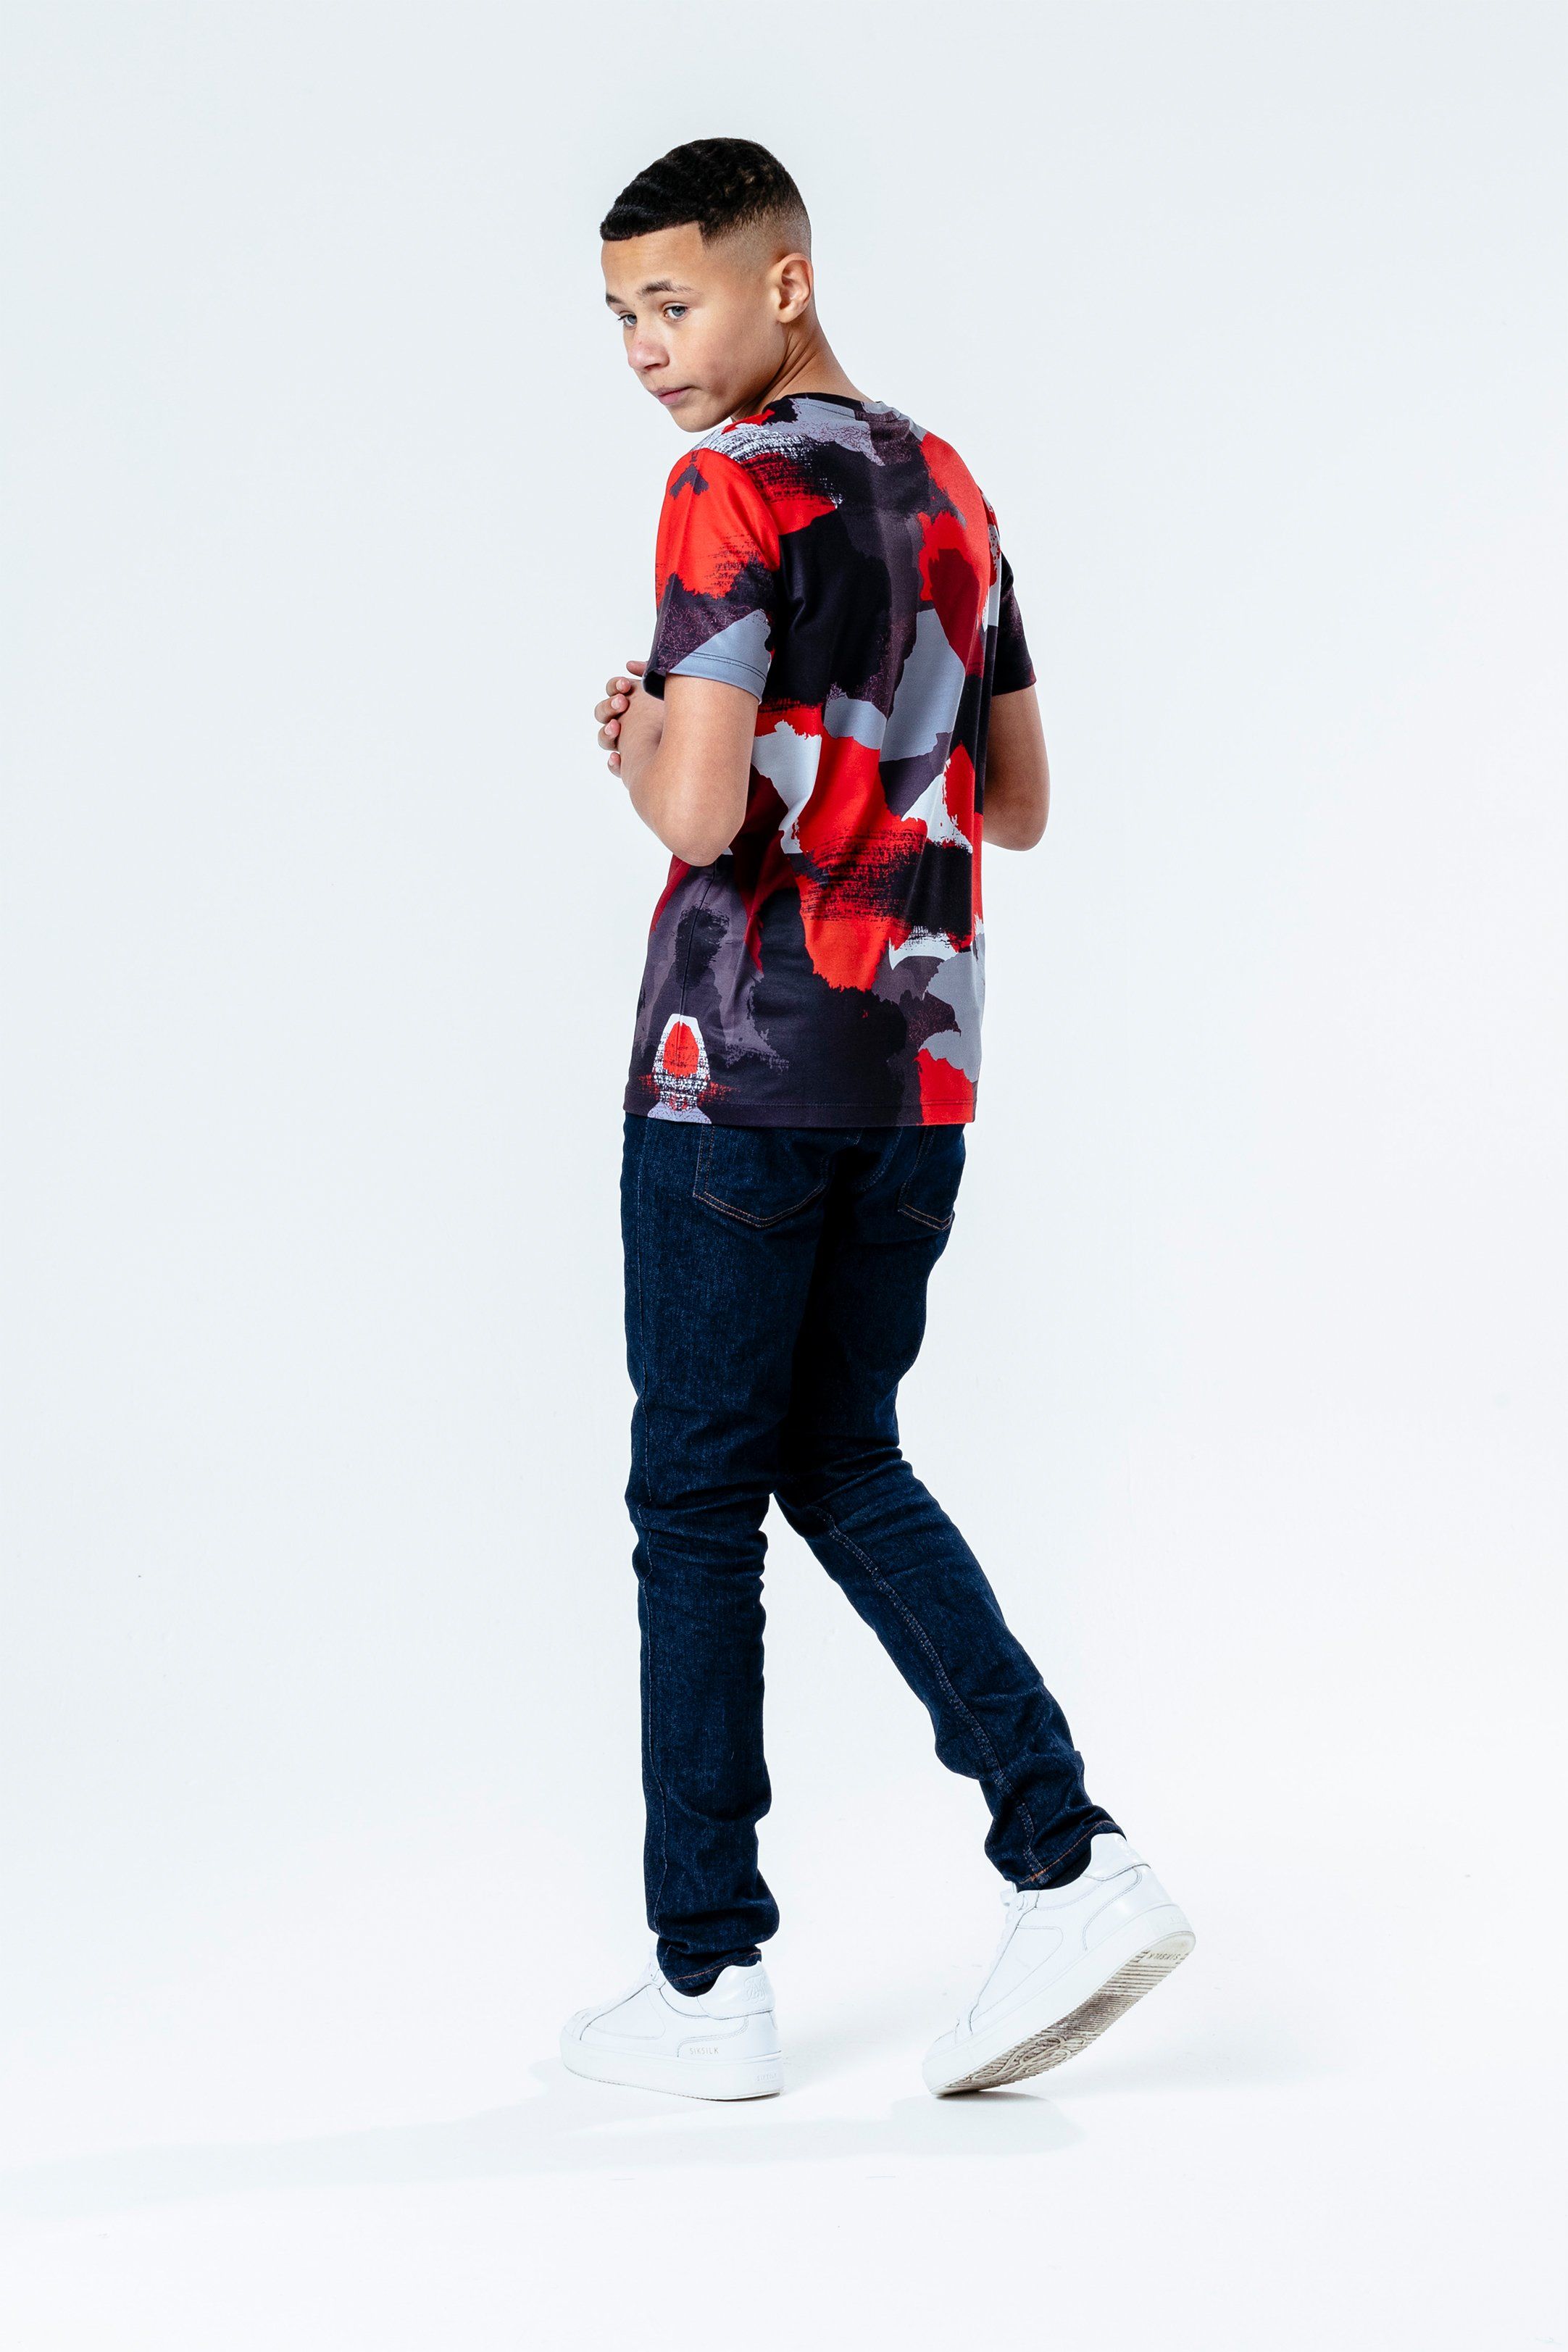 The HYPE. RED camo kids t-shirt features a red, burgundy, black and grey colour palette. Featuring a crew neck line, short sleeves and the iconic HYPE. script logo across the front in a contrasting white. Highlighting our signature all-over camo print. For a casual look, wear with a pair of sweat joggers, or if you're after a smarter look, a pair of skinny fit denim jeans and box fresh kicks. Machine wash at 30 degrees.